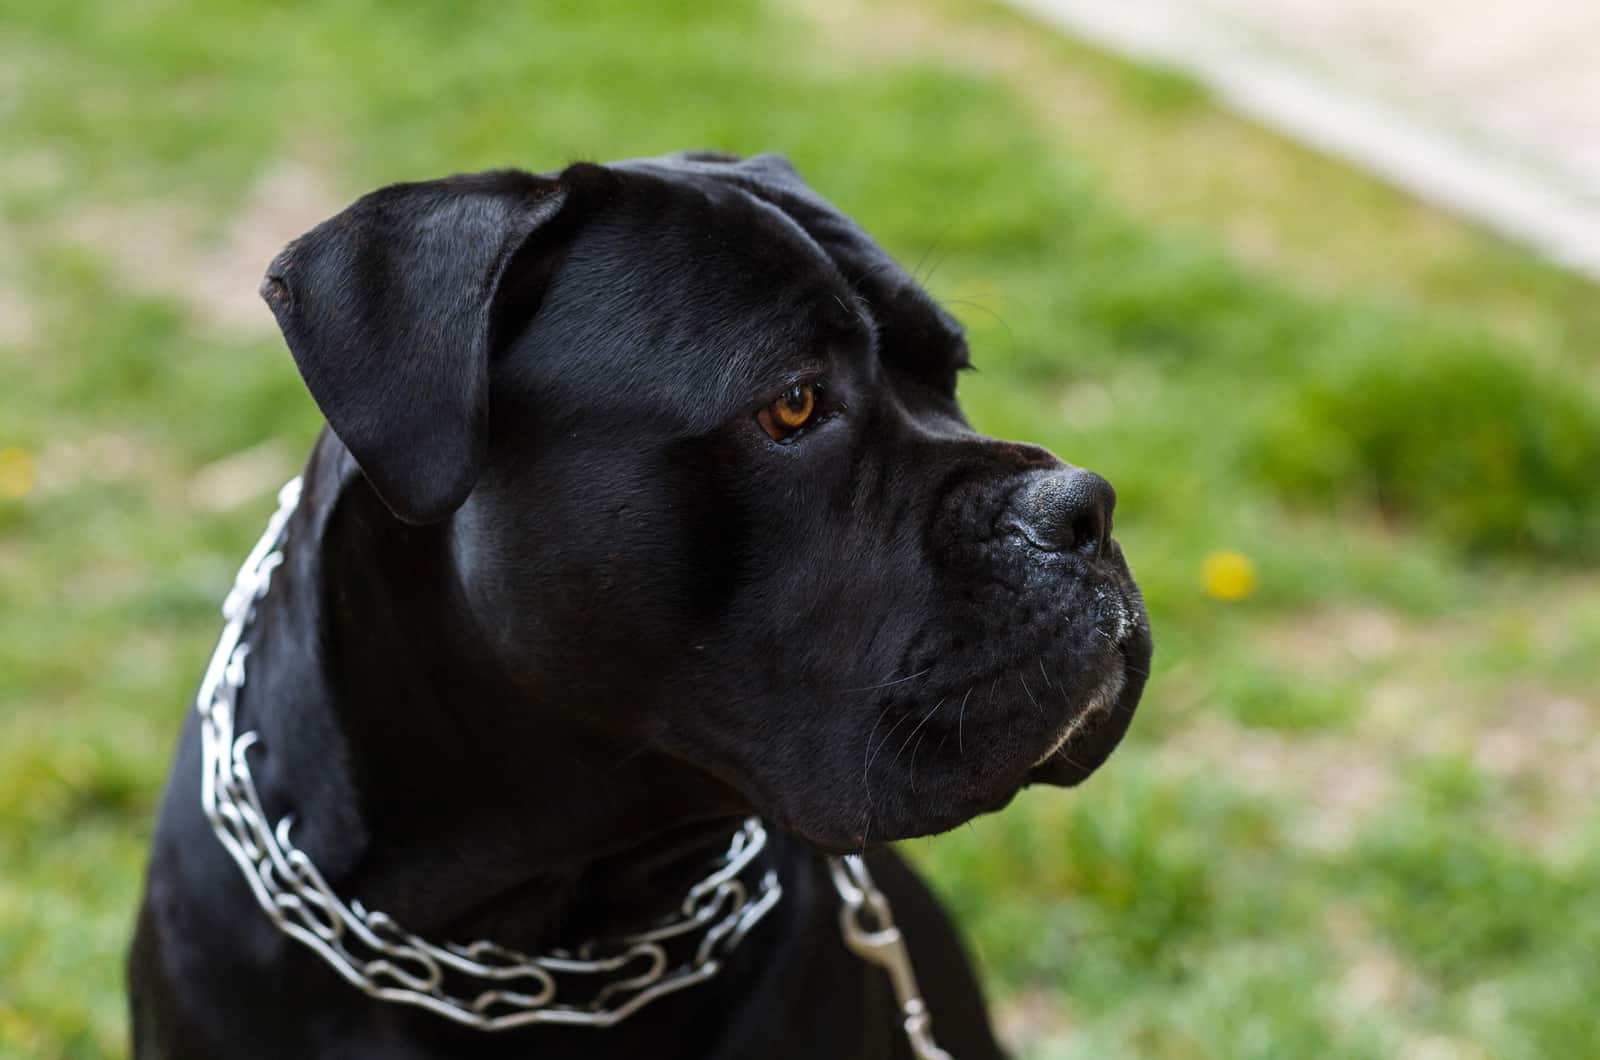 11 Best Dog Food For Cane Corso: Let’s Prepare A Dog Feast